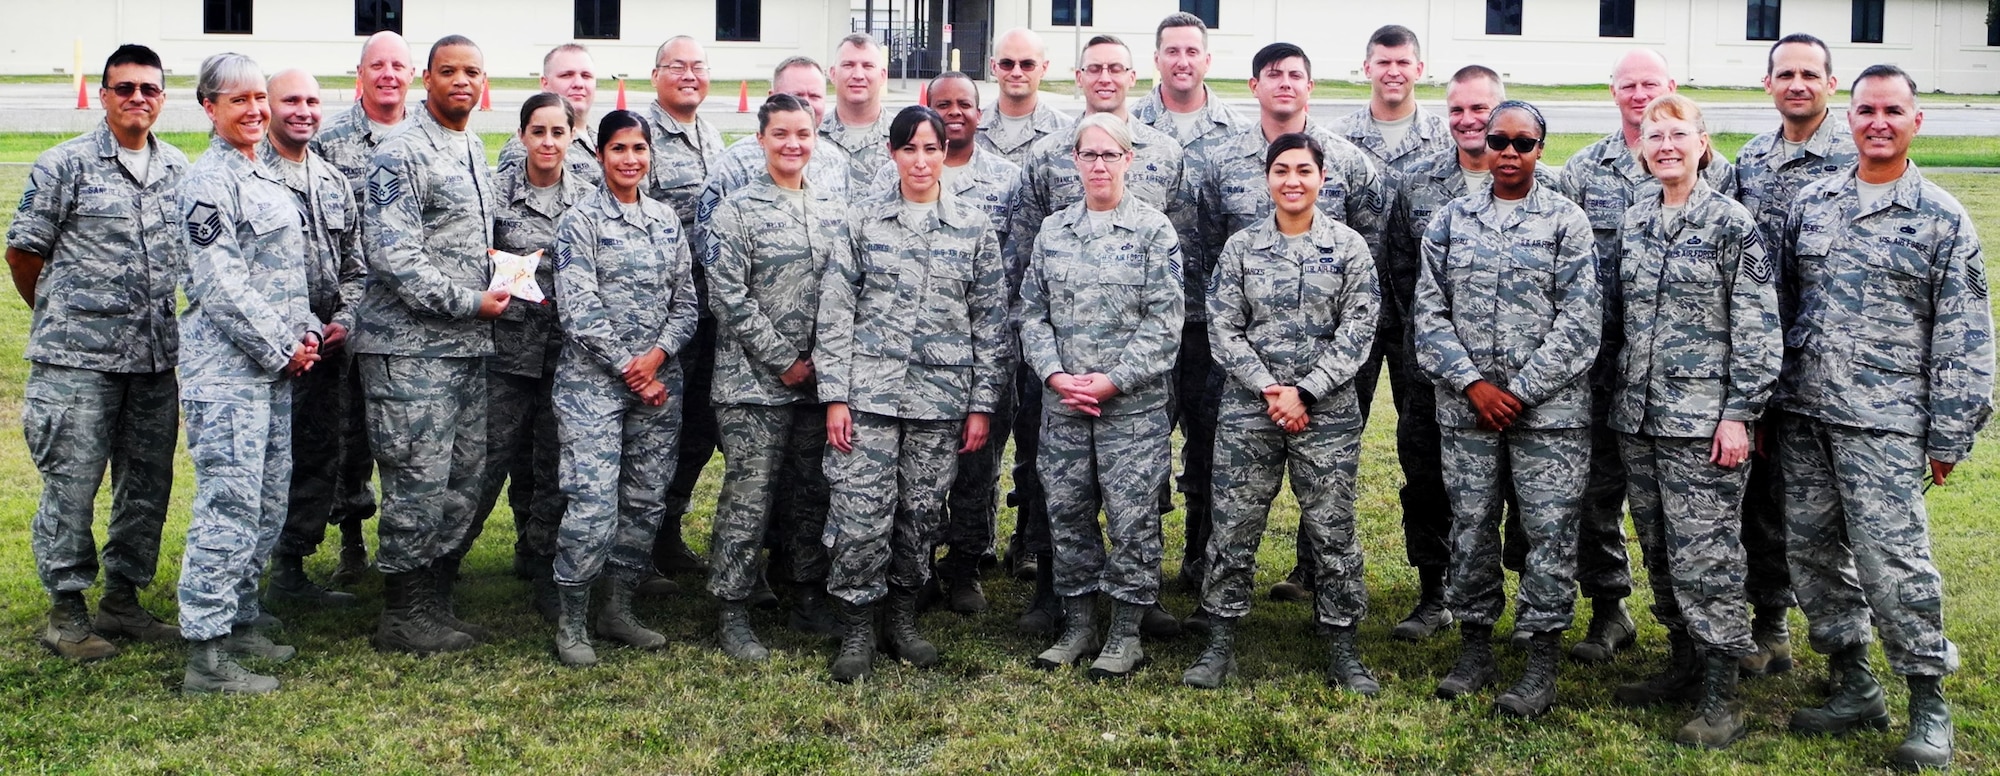 Reserve senior noncommissioned officers attending the 340th Flying Training Group-hosted Air Force Reserve Command senior NCO leadership course